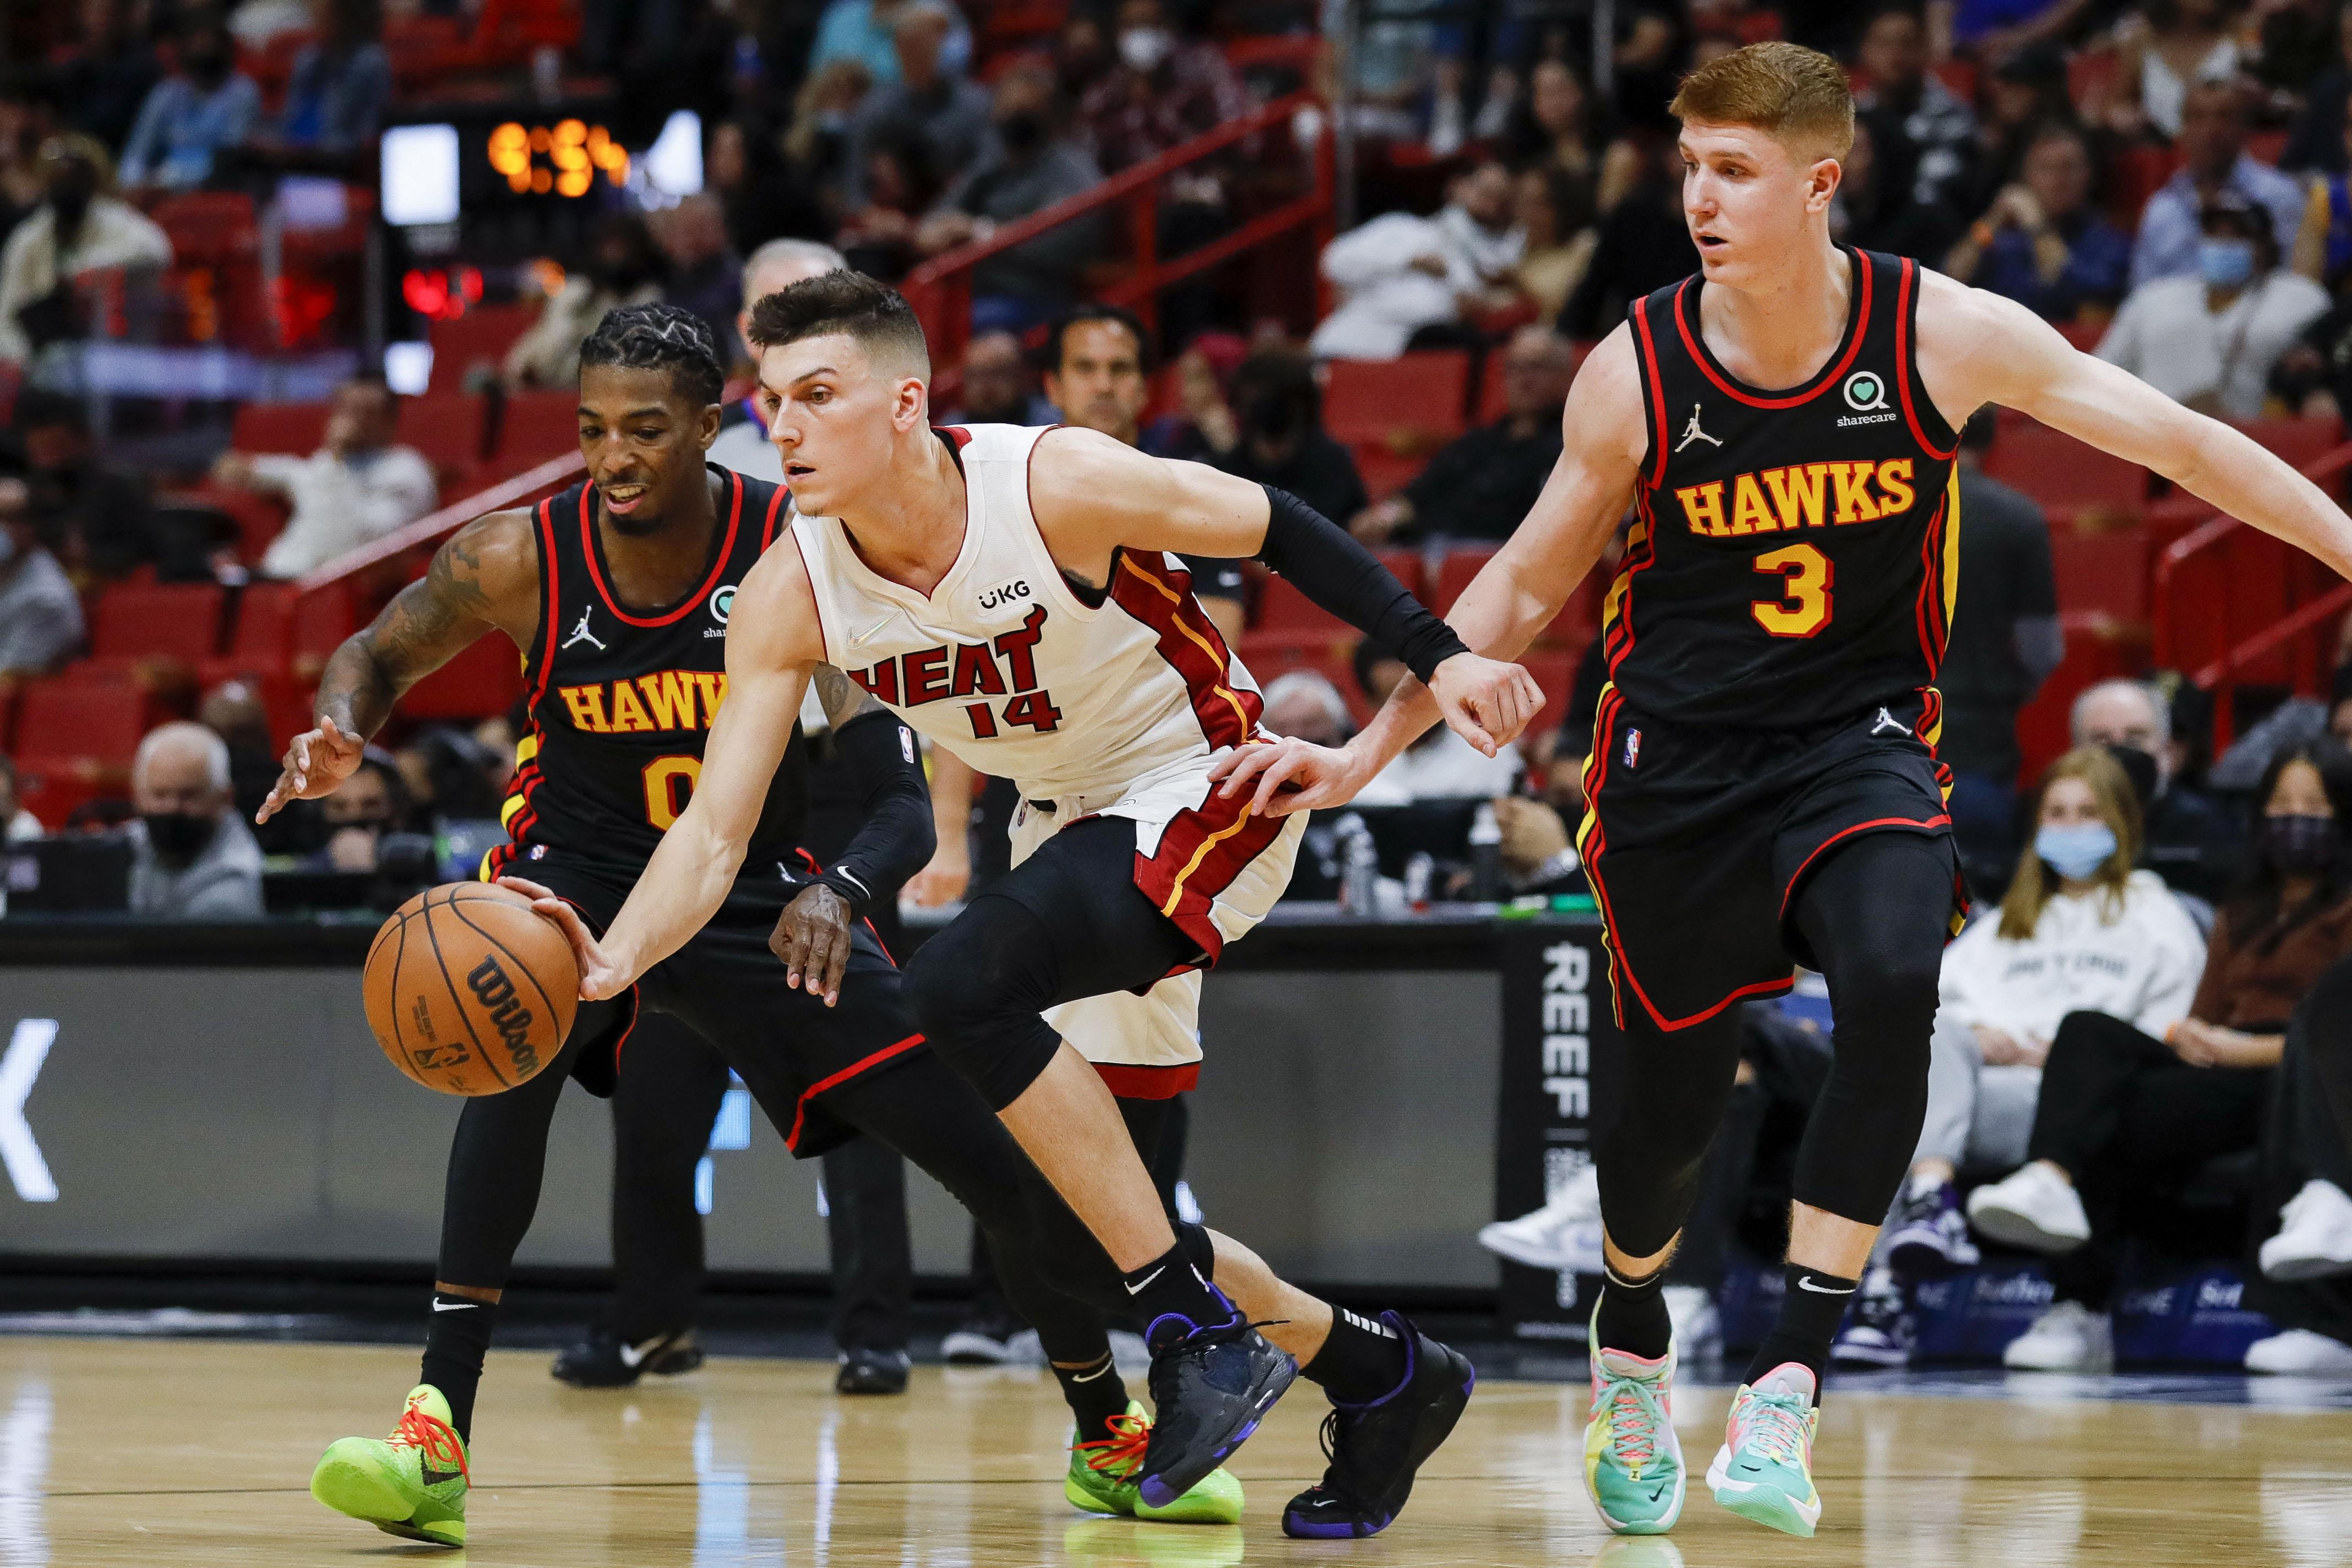 Miami Heat's Tyler Herro on track to return for Game 3 of NBA Finals